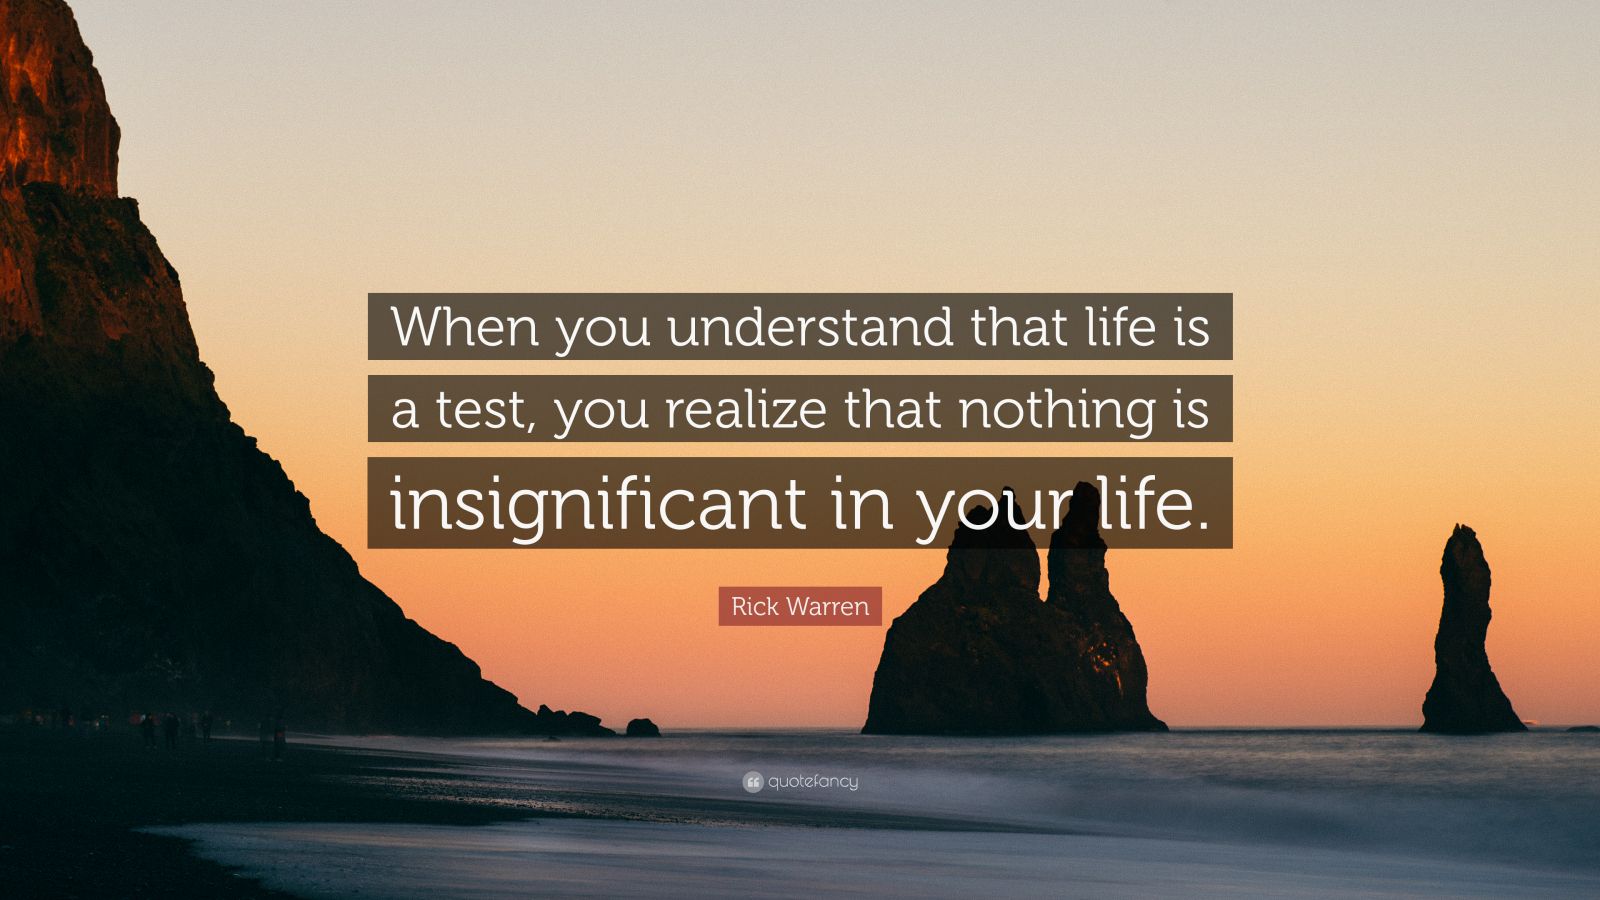 2140434 Rick Warren Quote When you understand that life is a test you